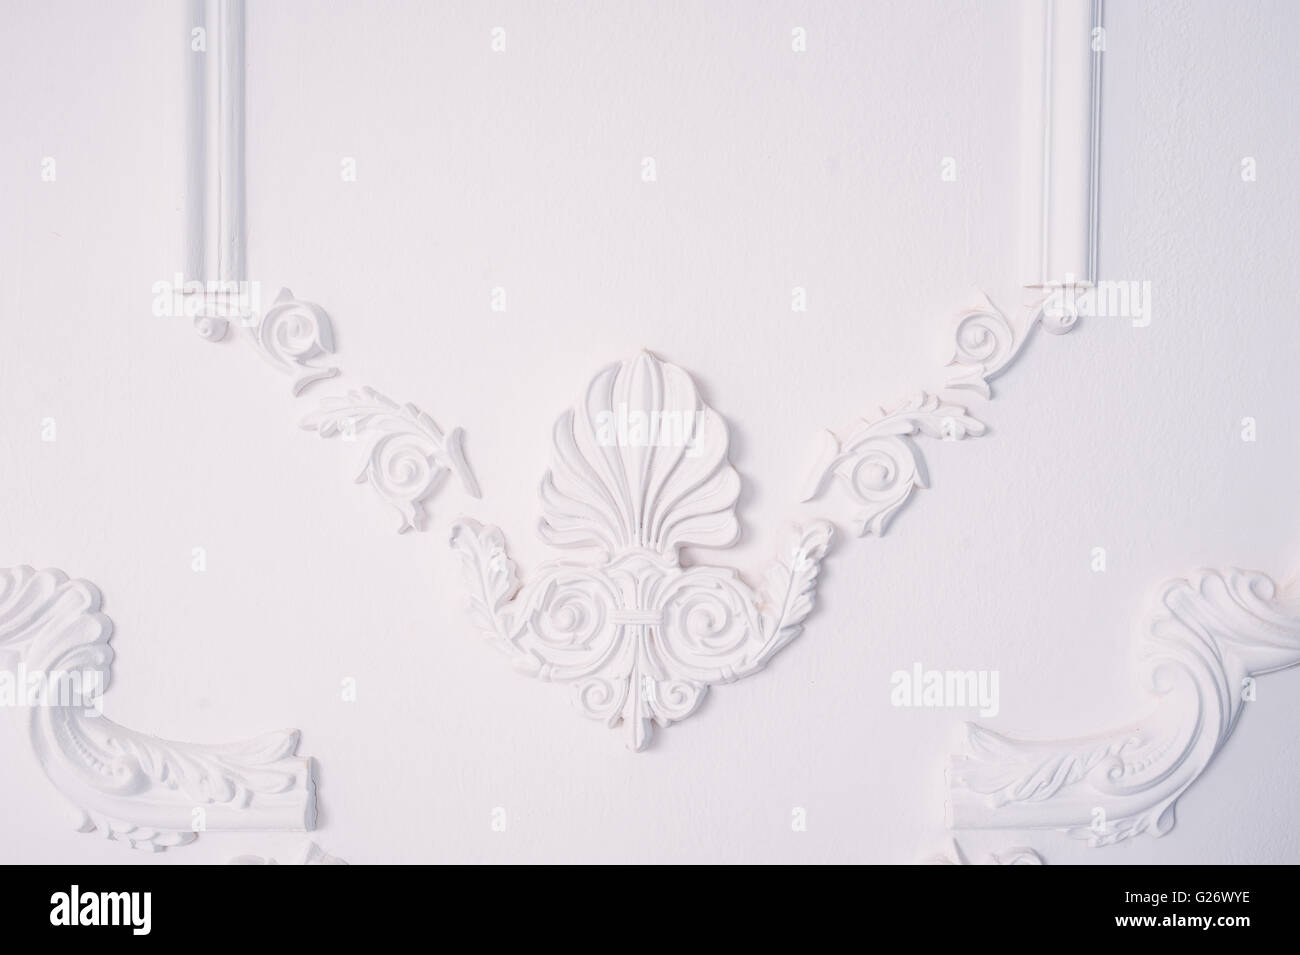 Stucco element of architectural decoration on the wall Stock Photo